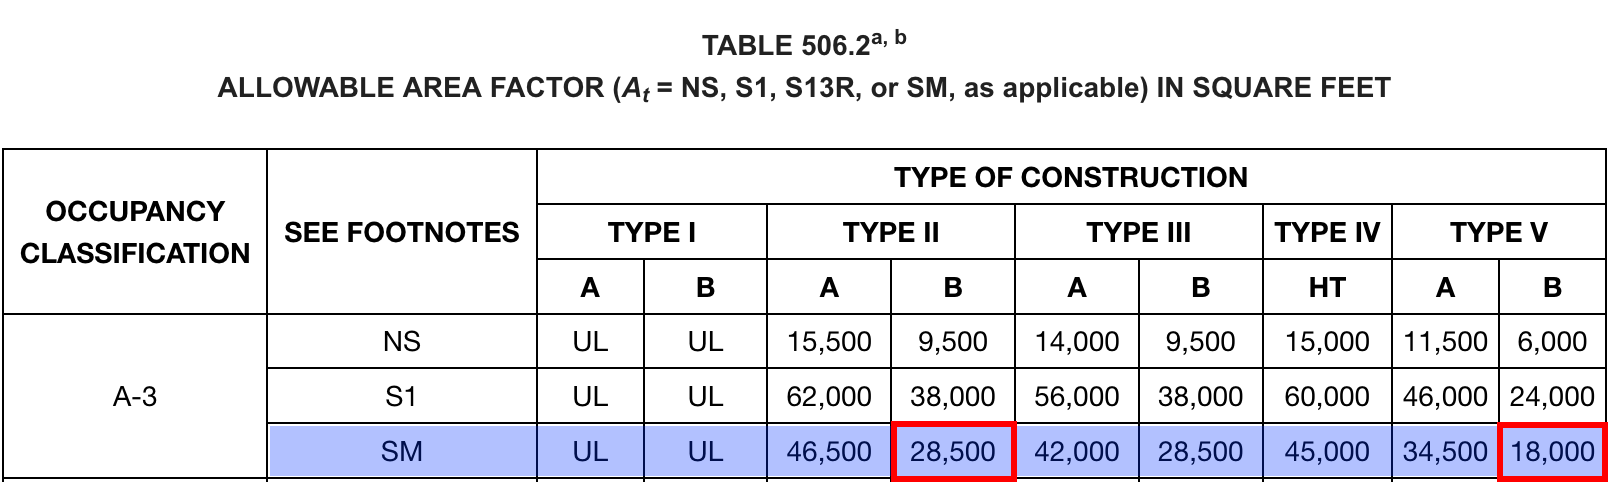 Table 506.2 from 2015 NYS Building Code